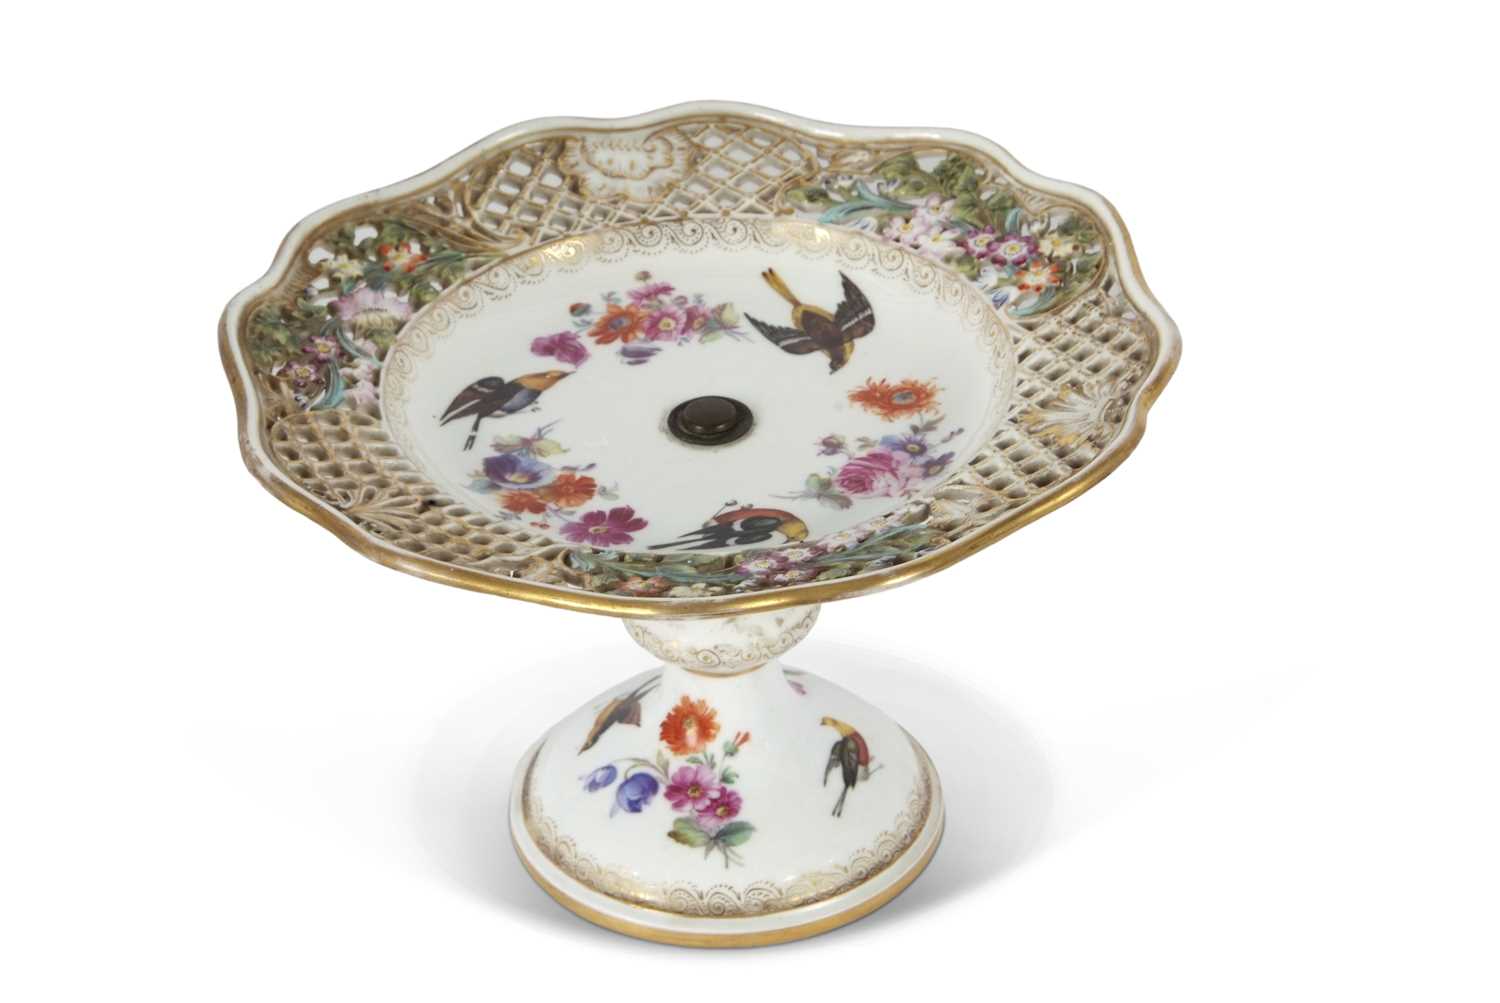 A Meissen tazza, the centre painted with birds and flowers within reticulated borders and with